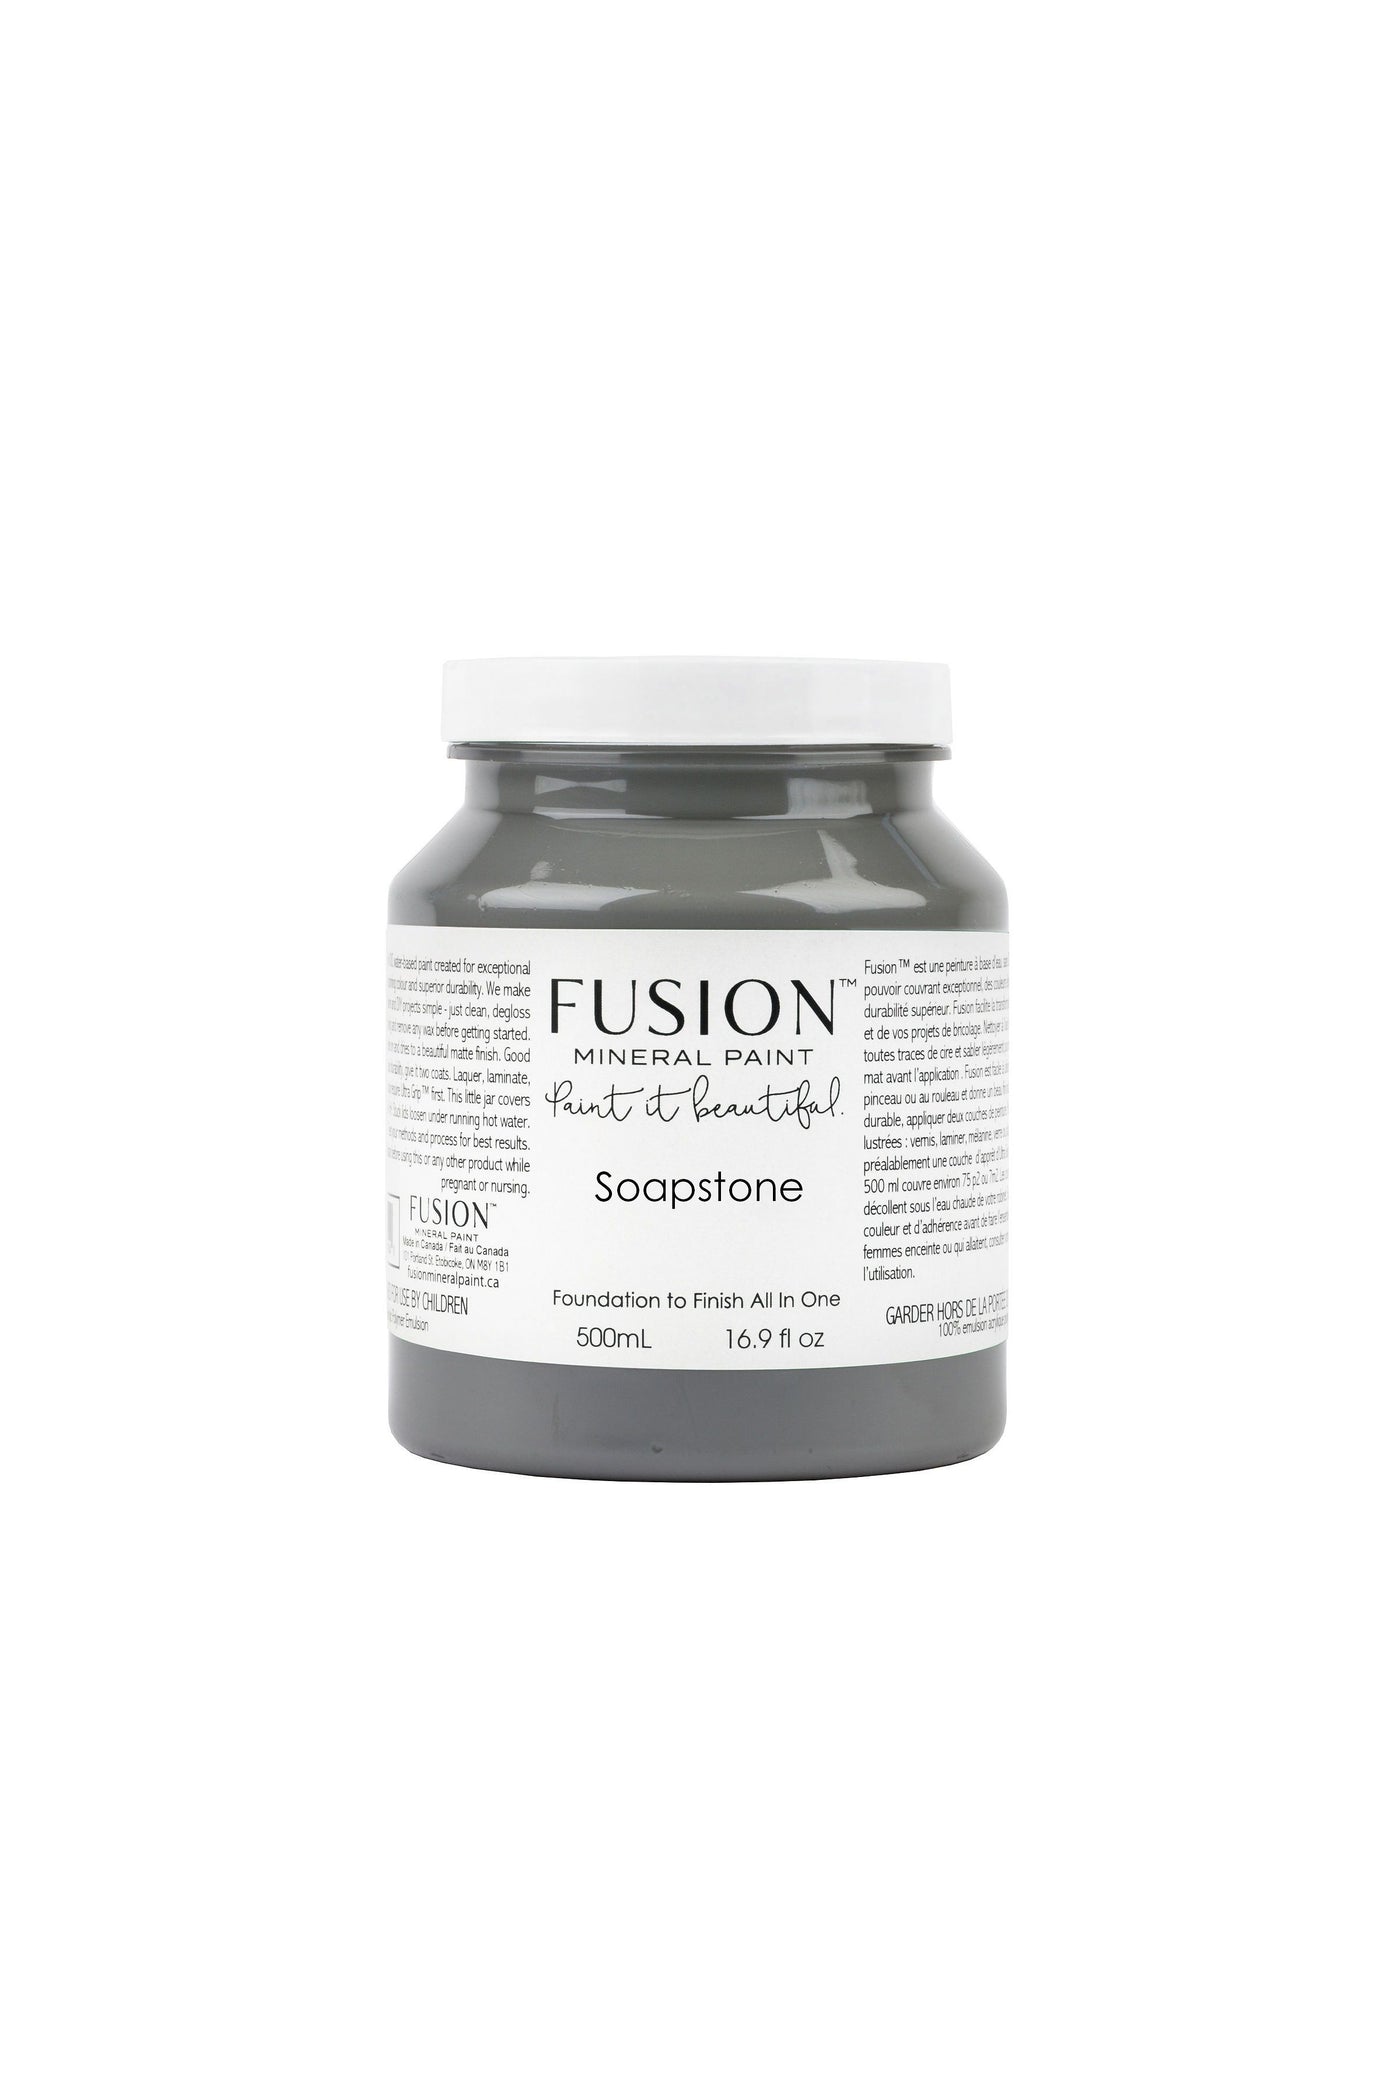 Fusion Mineral Paint - SOAP STONE mid-tone grey with blue undertones 500ml